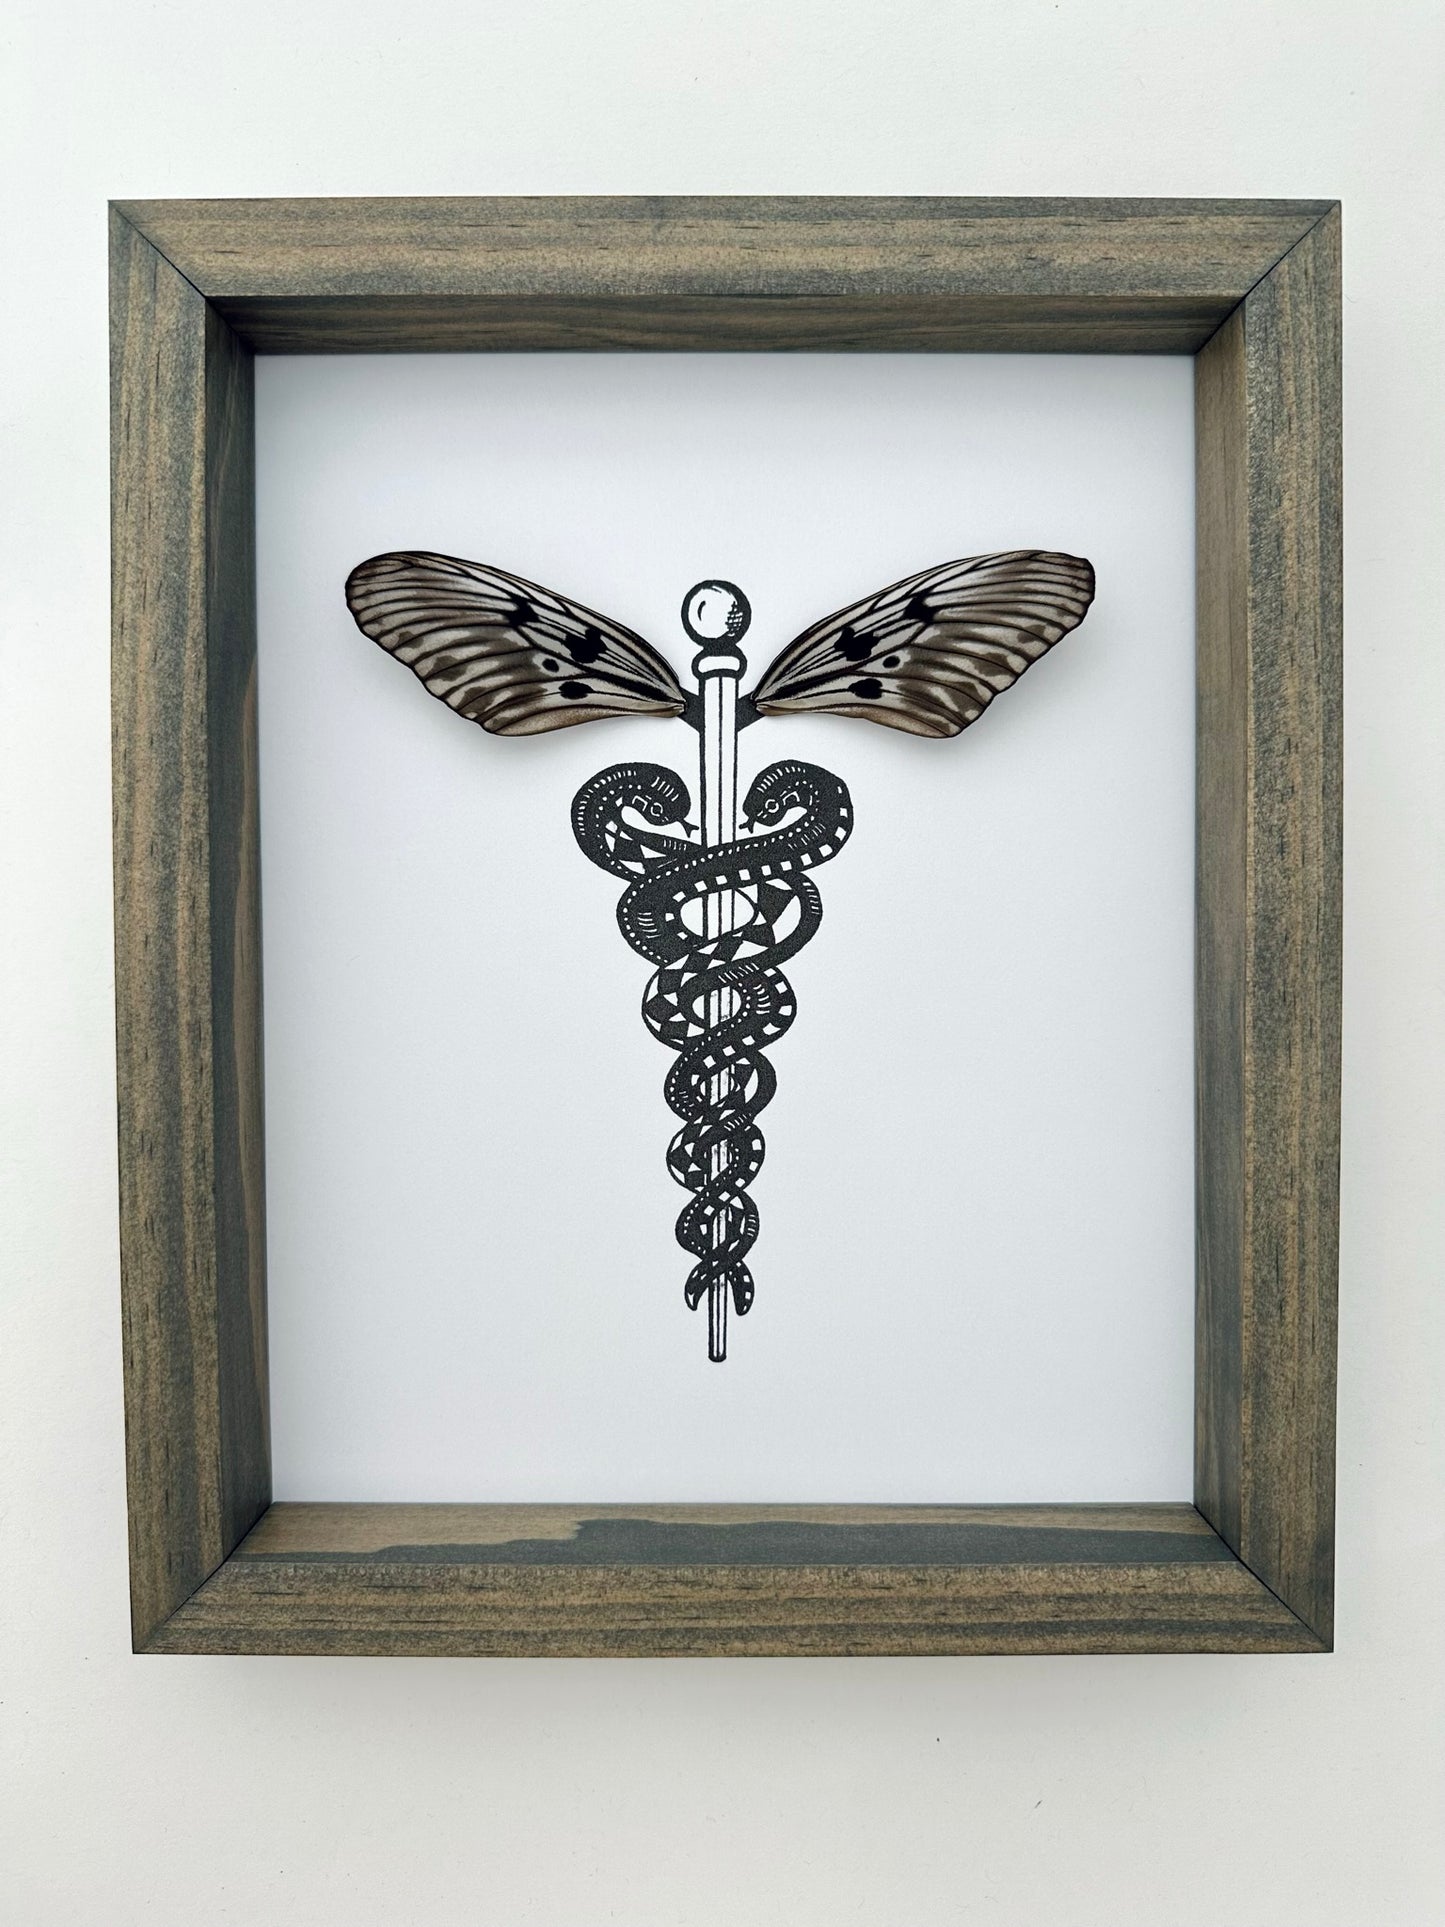 Caduceus Medical Symbol Butterfly Wing ArtFrom and For Conservation